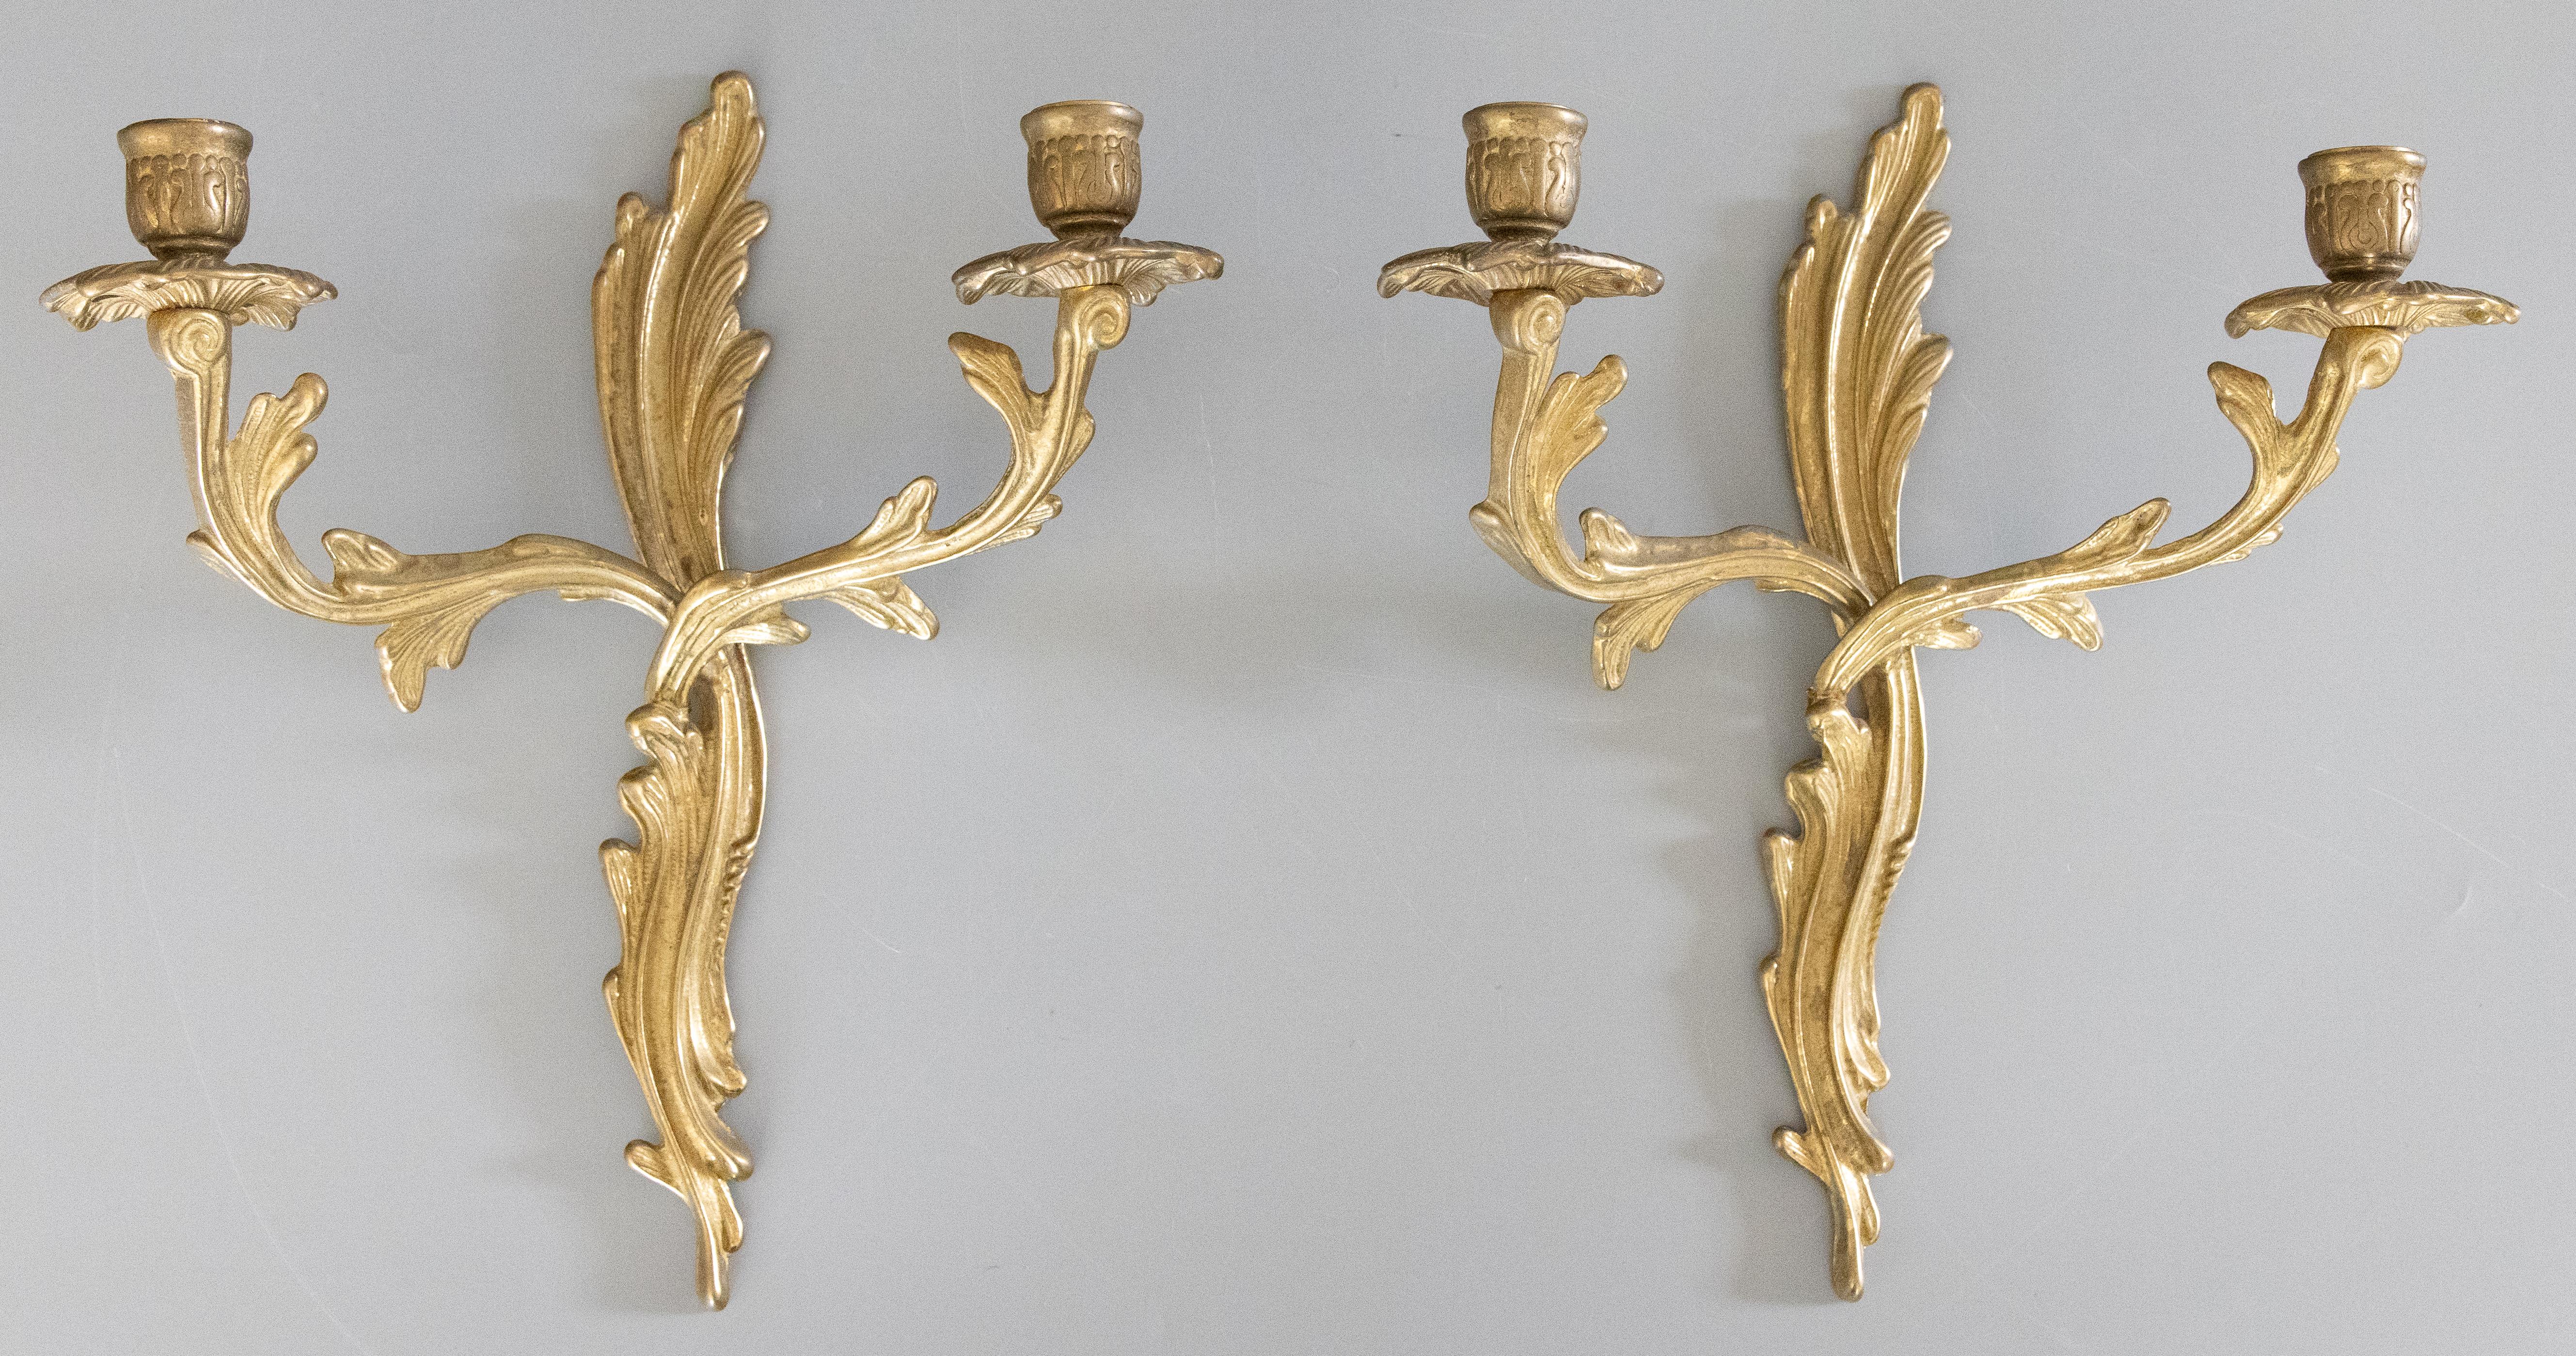 Pair of Antique French Rococo Style Gilt Brass Candelabras Wall Candle Sconces For Sale 7